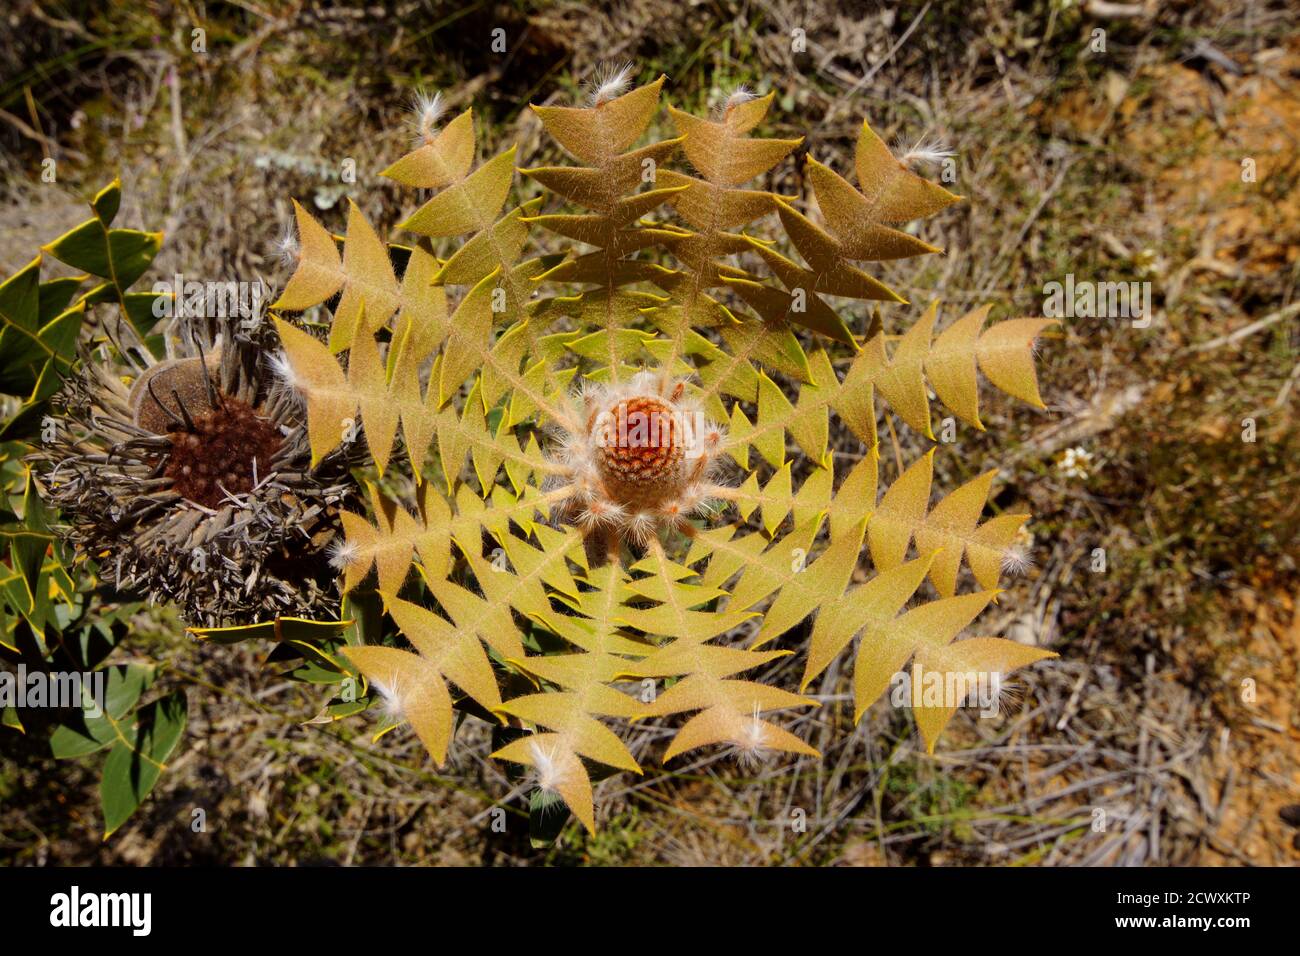 Jagged leaves of the bird´s nest Banksia (Banksia baxteri) with flower cone, Western Australia Stock Photo